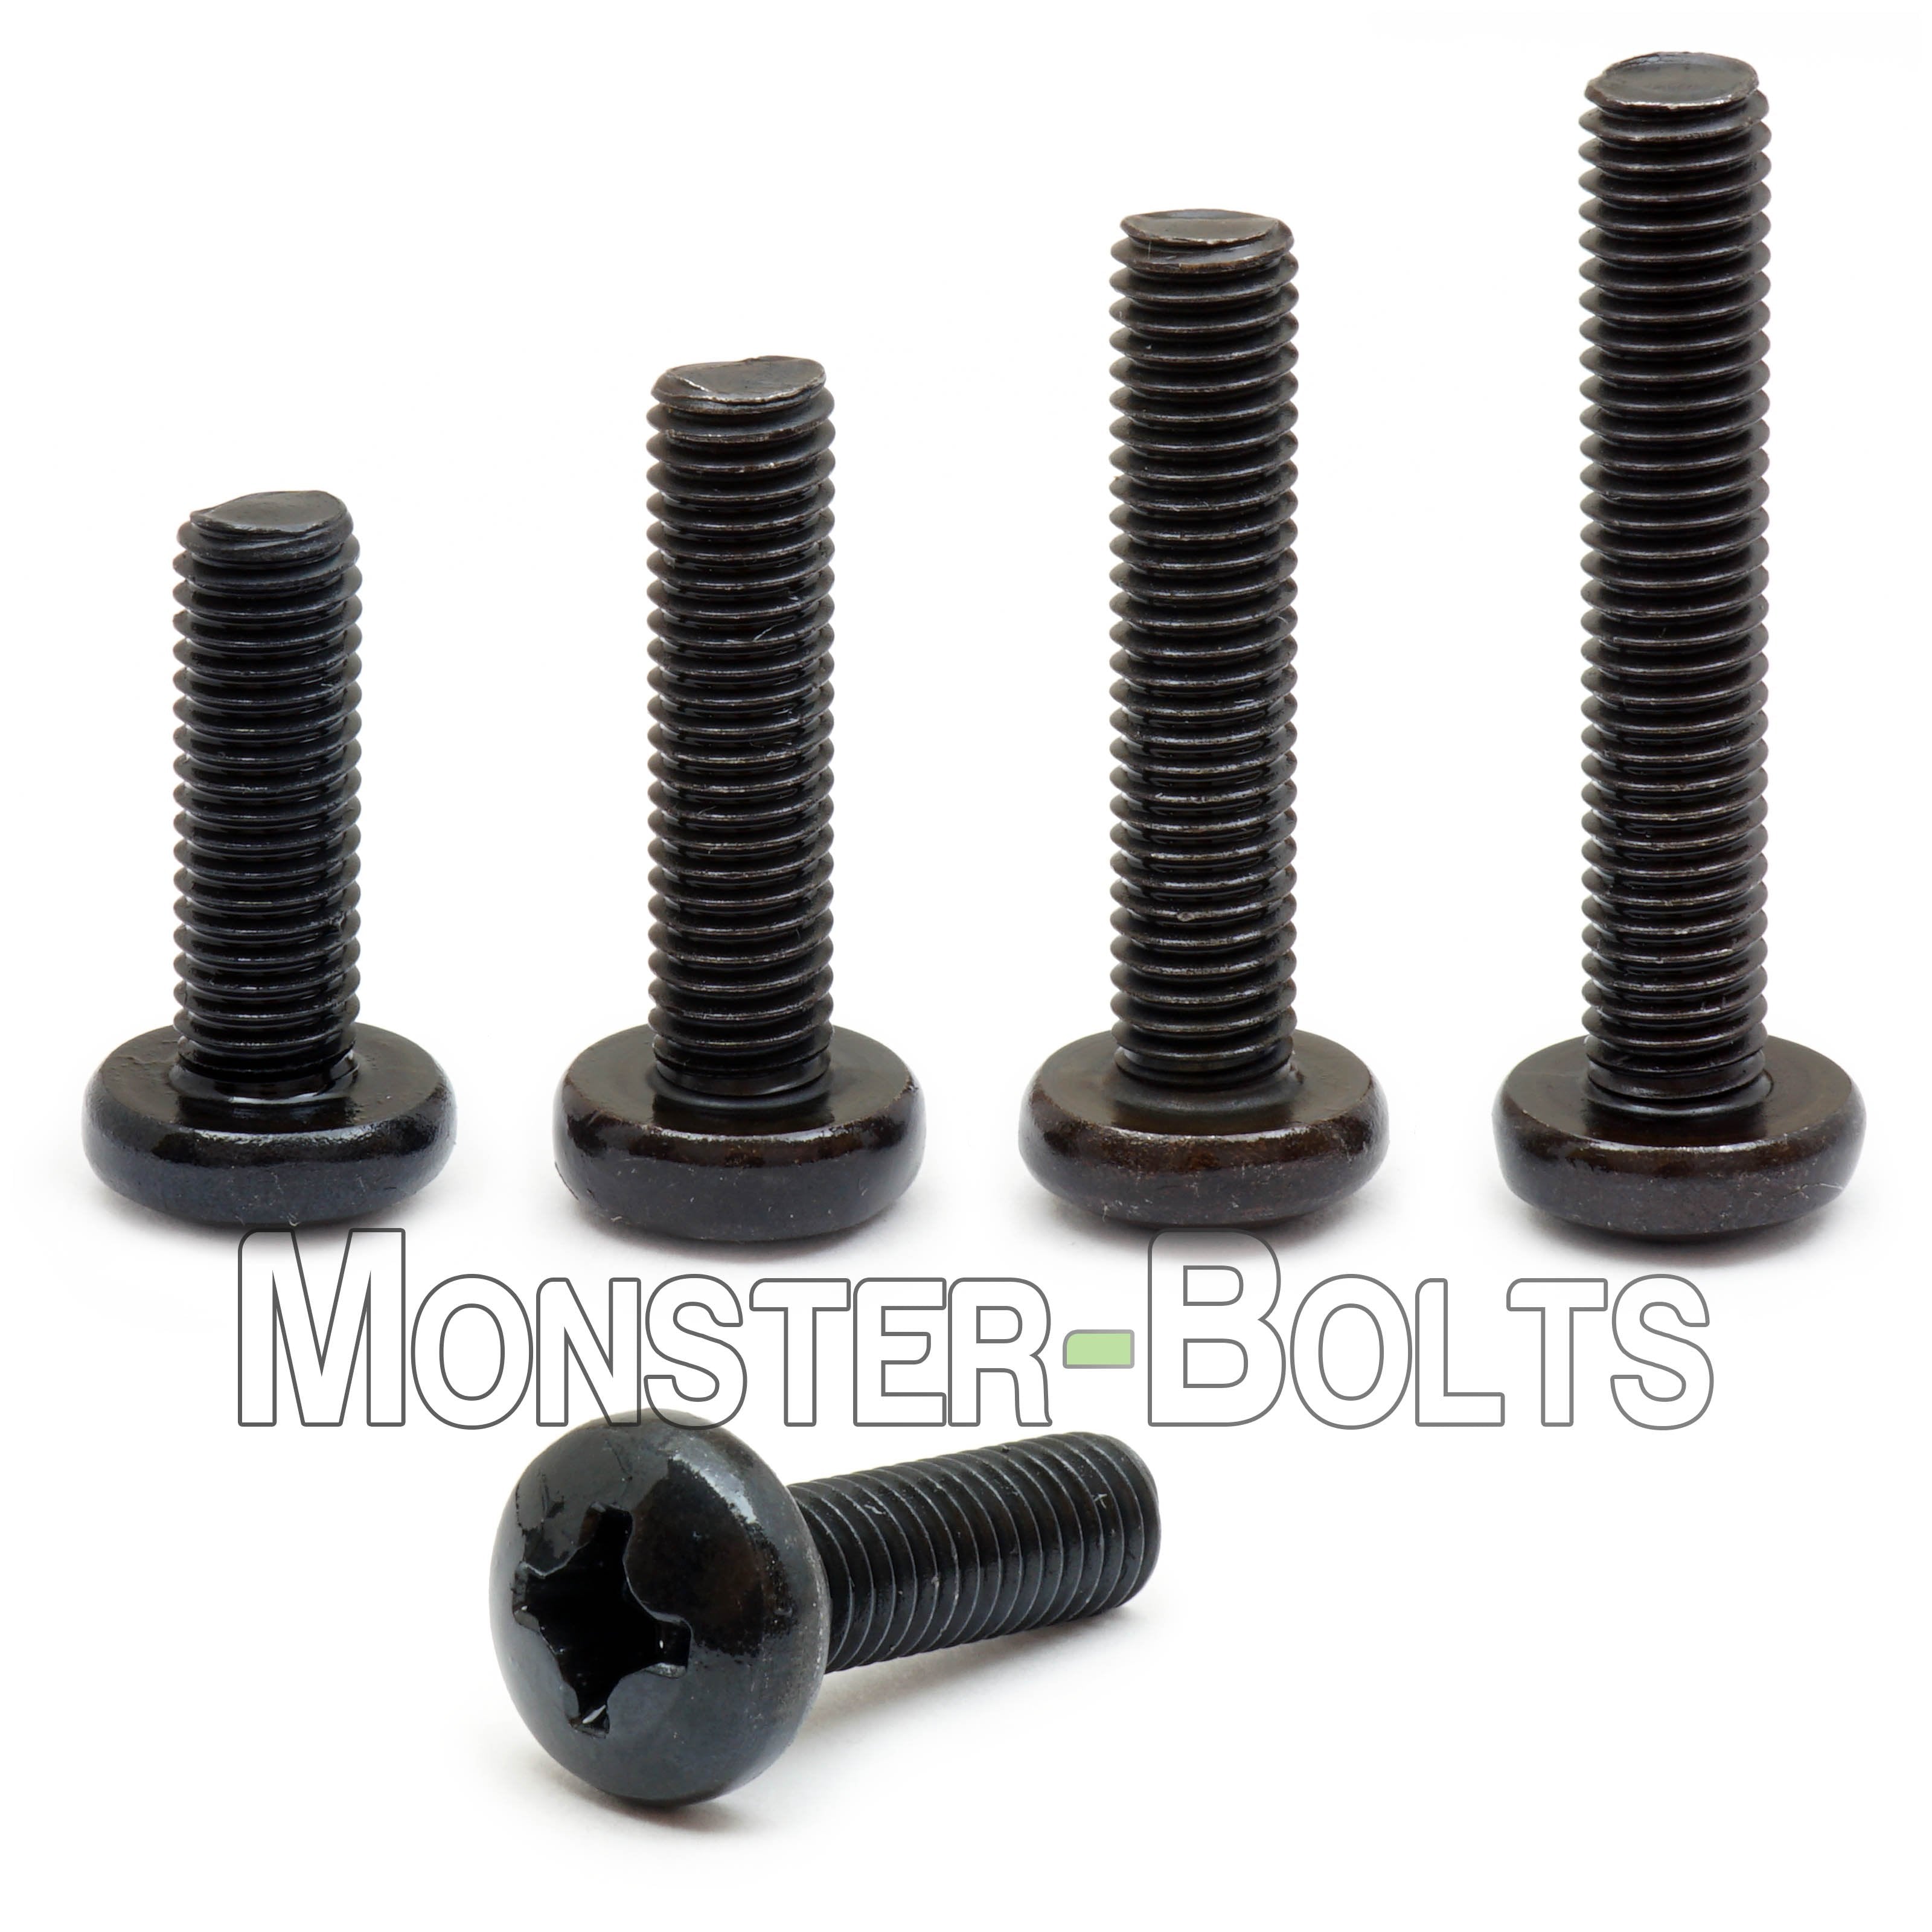 10-32 Wing Nut Black Anodized Qty 25 